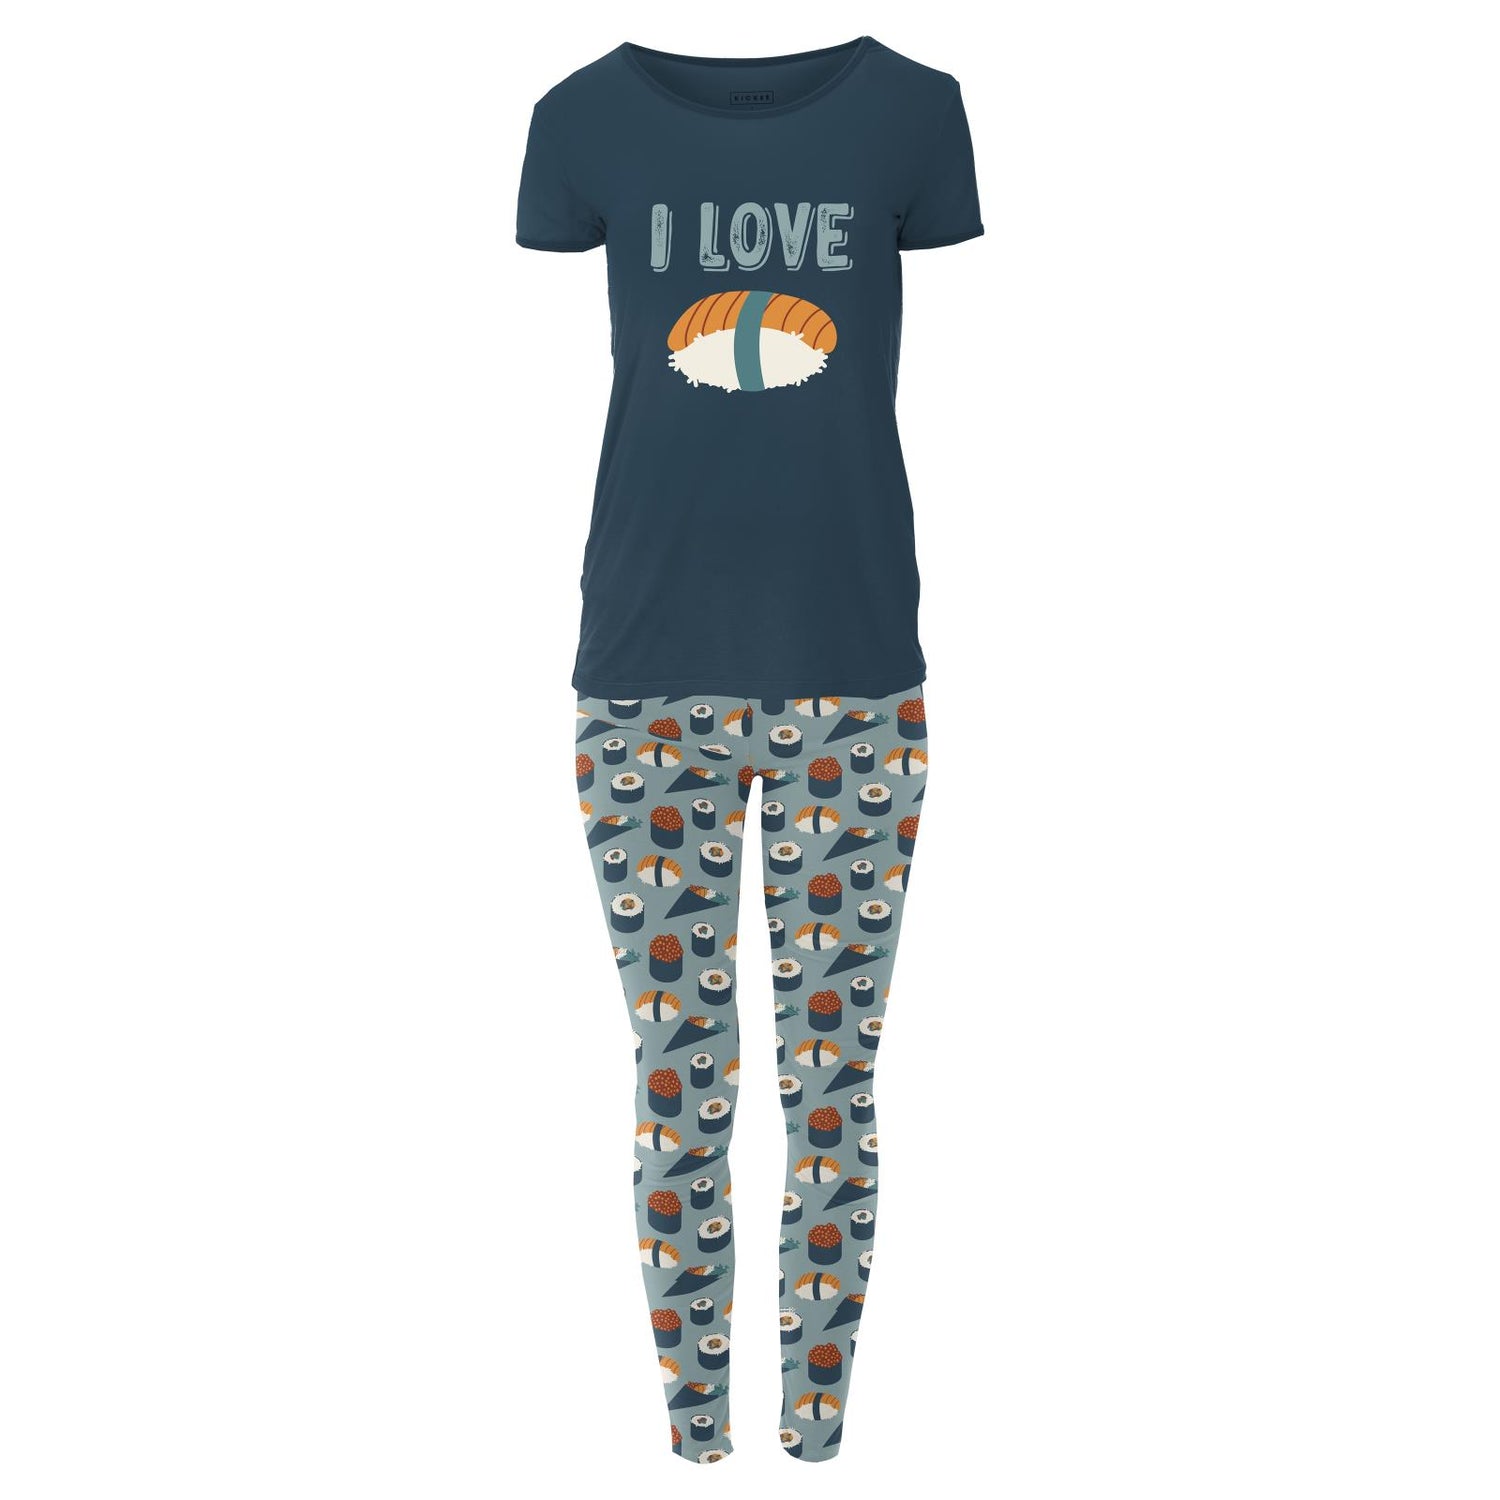 Women's Short Sleeve Graphic Tee Fitted Pajama Set in Jade Sushi